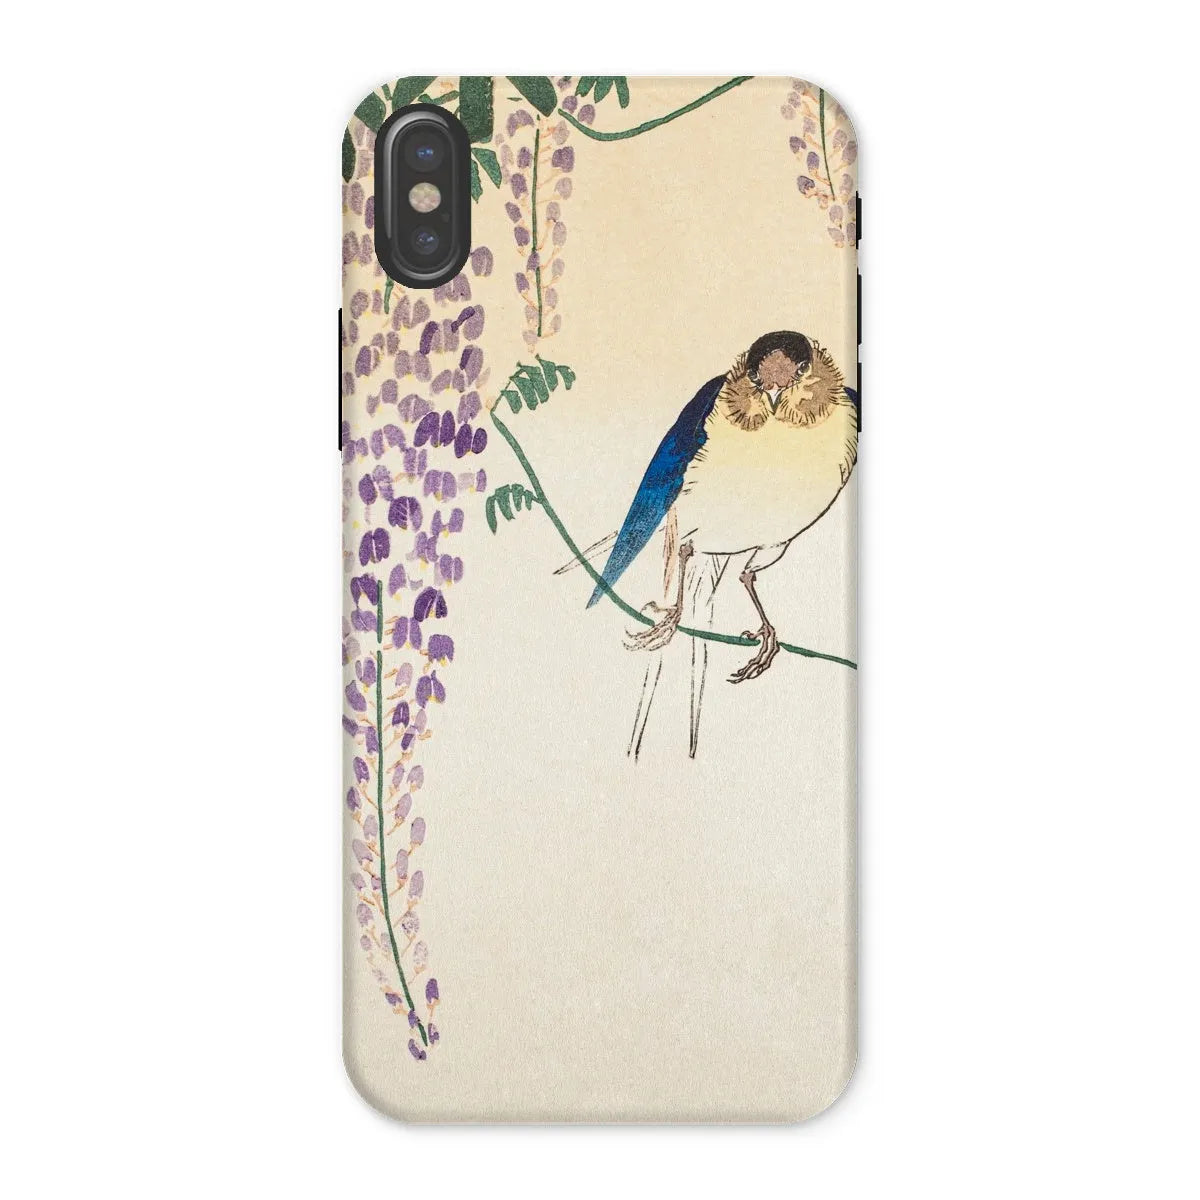 Wisteria And Swallow - Japanese Art Phone Case - Ohara Koson - Iphone x / Matte - Mobile Phone Cases - Aesthetic Art